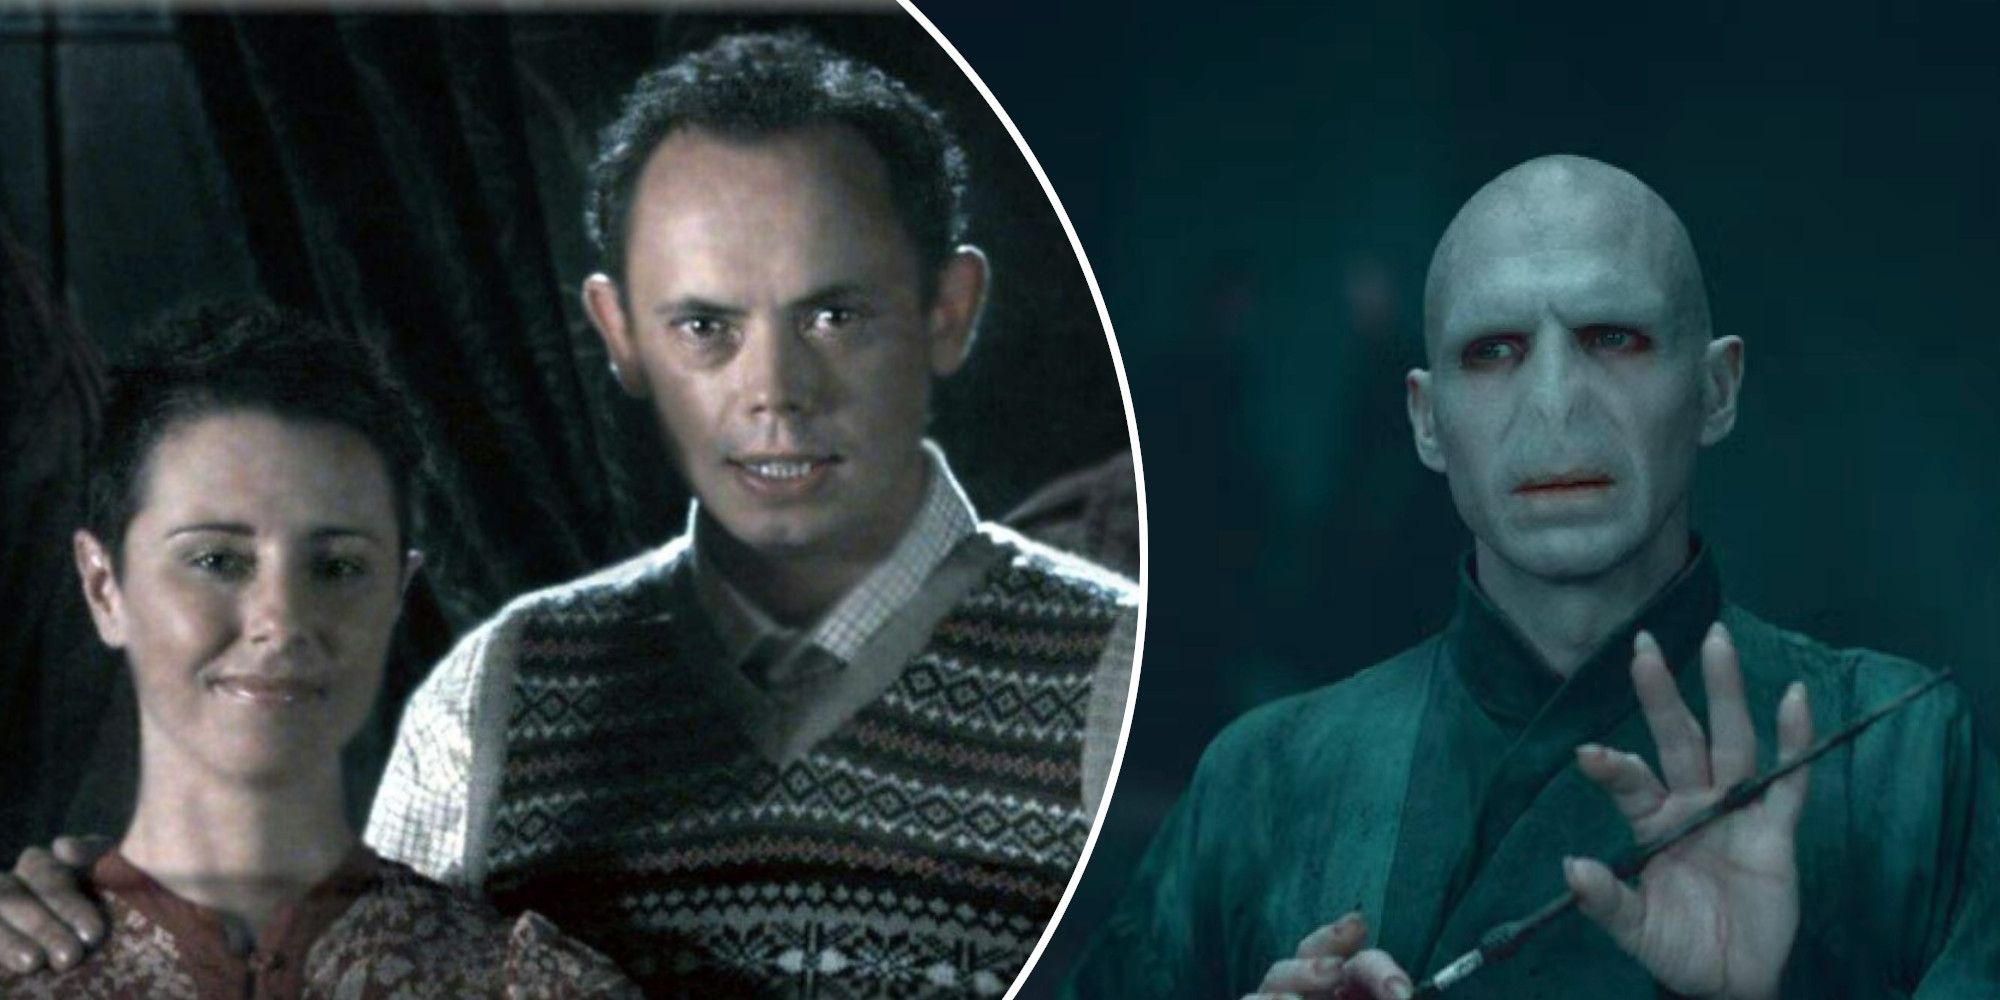 Harry Potter Ways Neville Longbottom Could Be The Perfect Chosen One Voldemort vs the Longbottoms